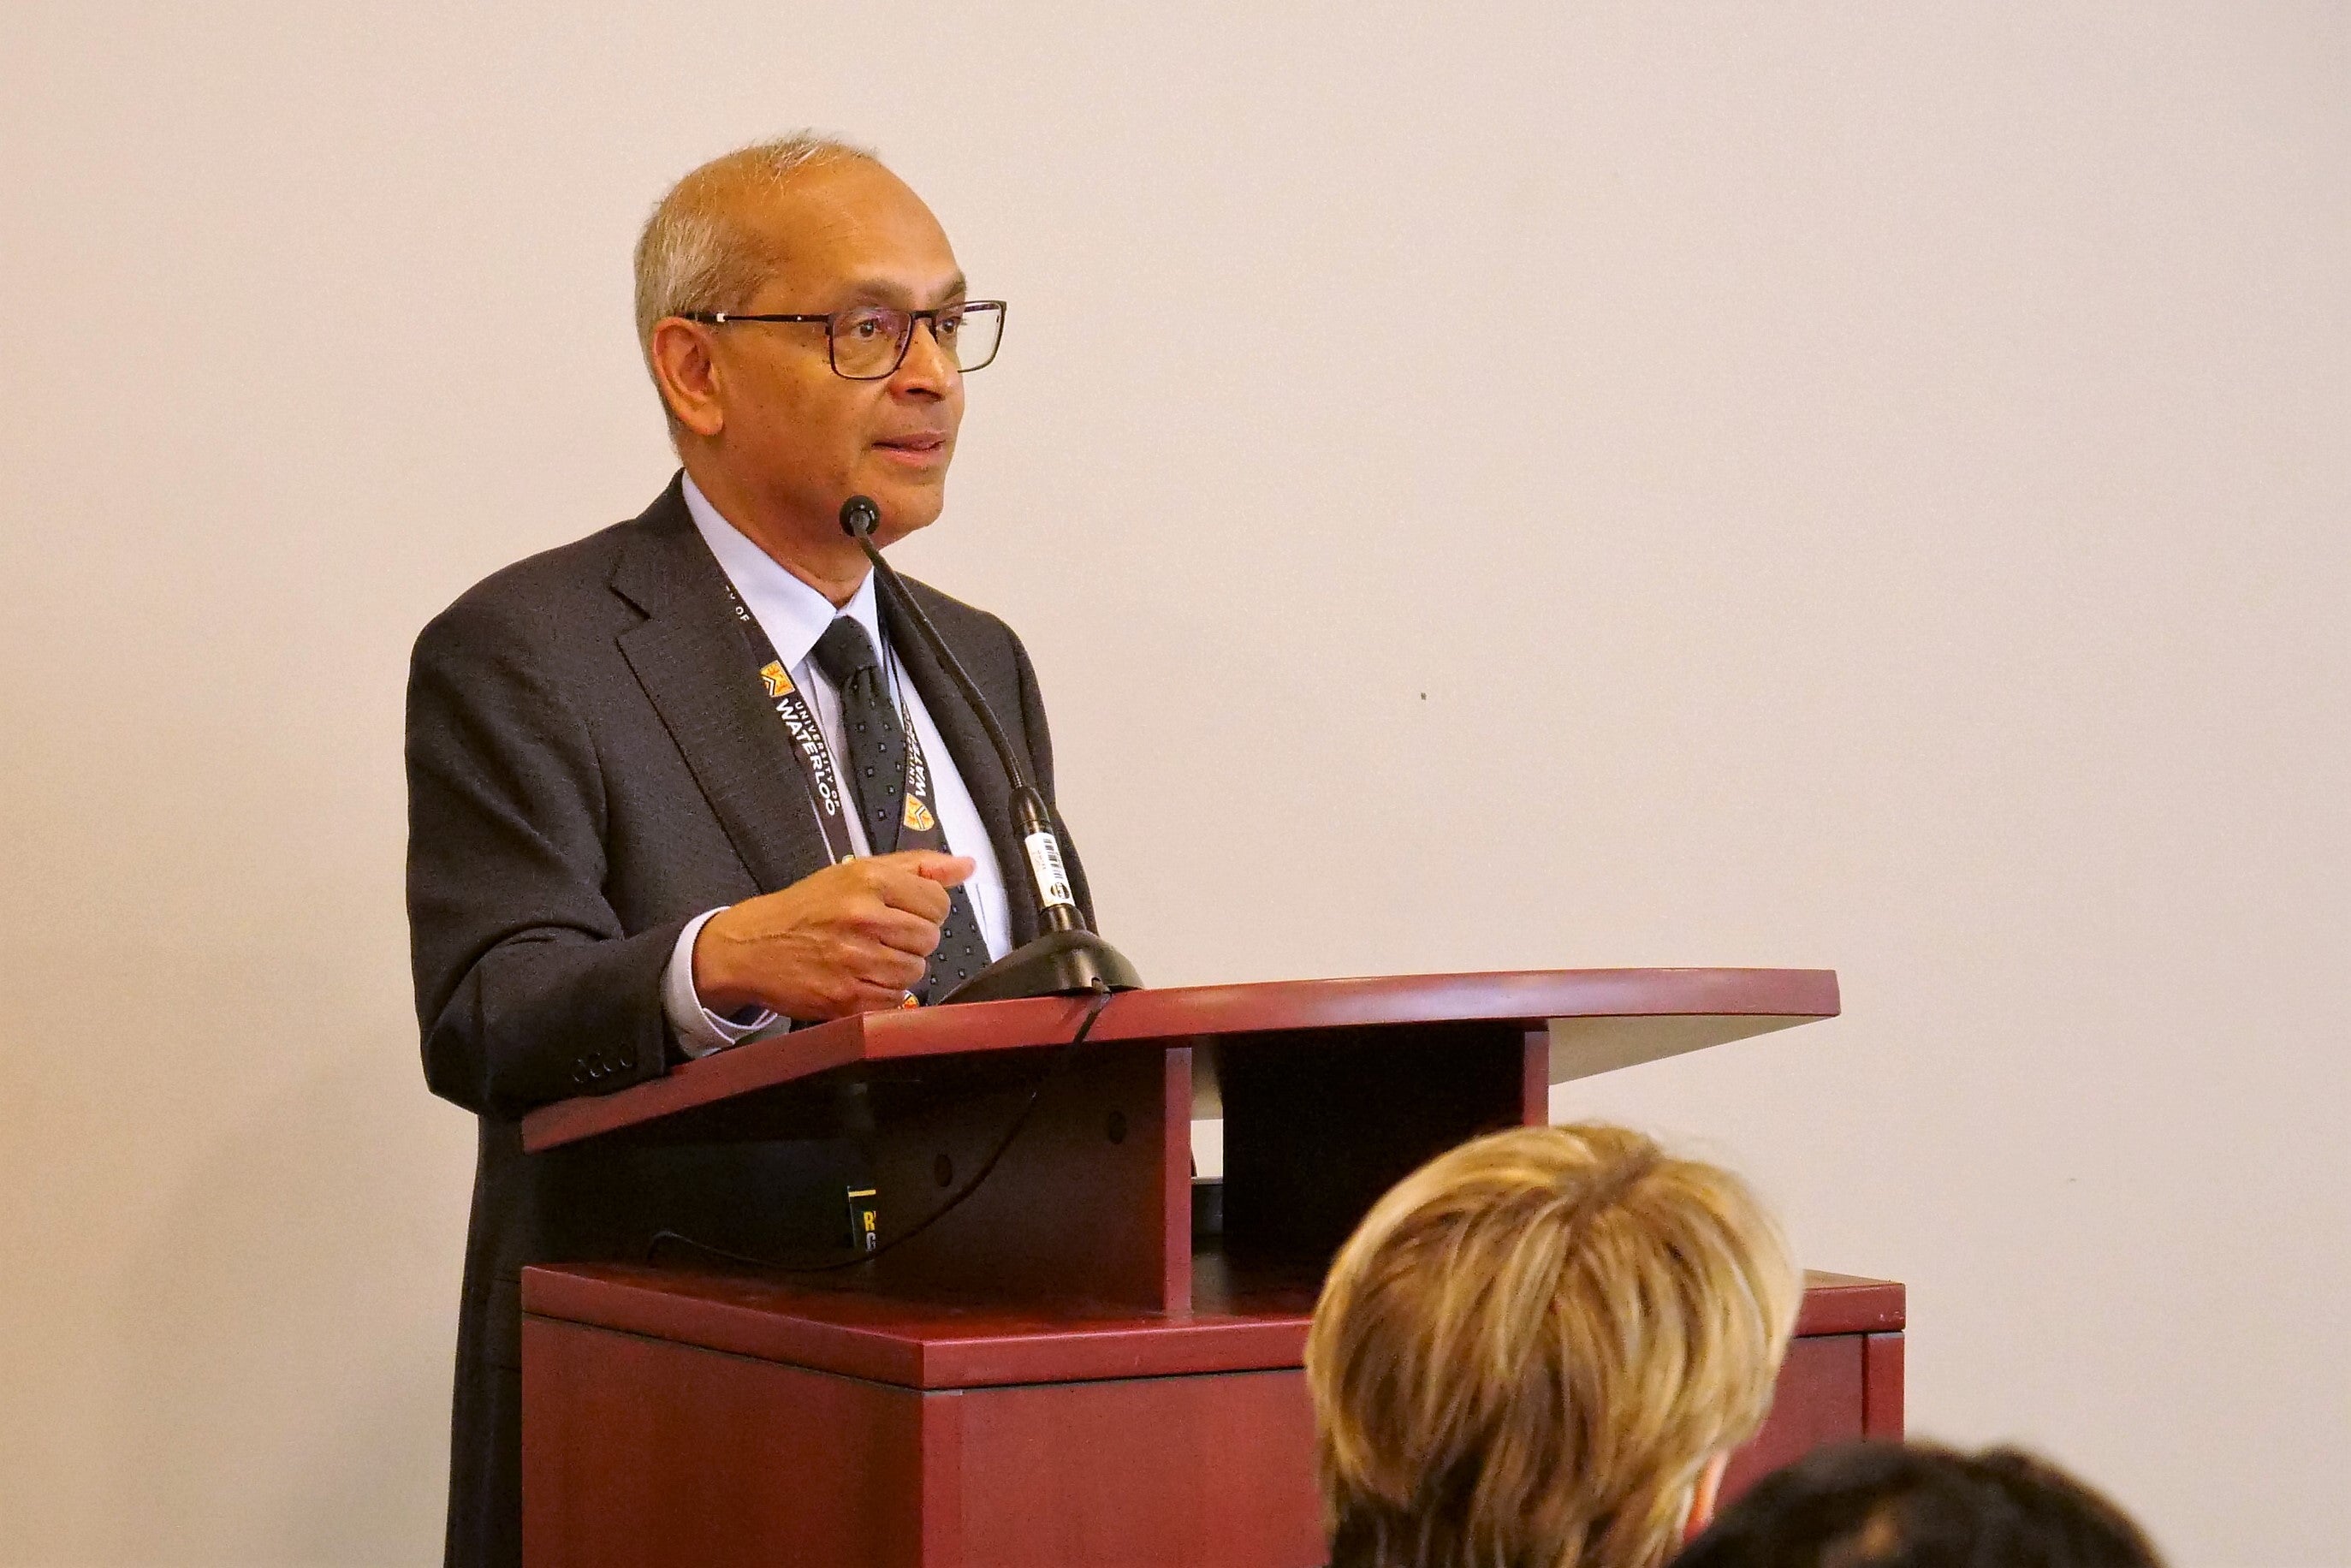 Waterloo innovation Summit - Vivek Goel, President and Vice-Chancellor, addresses the guests